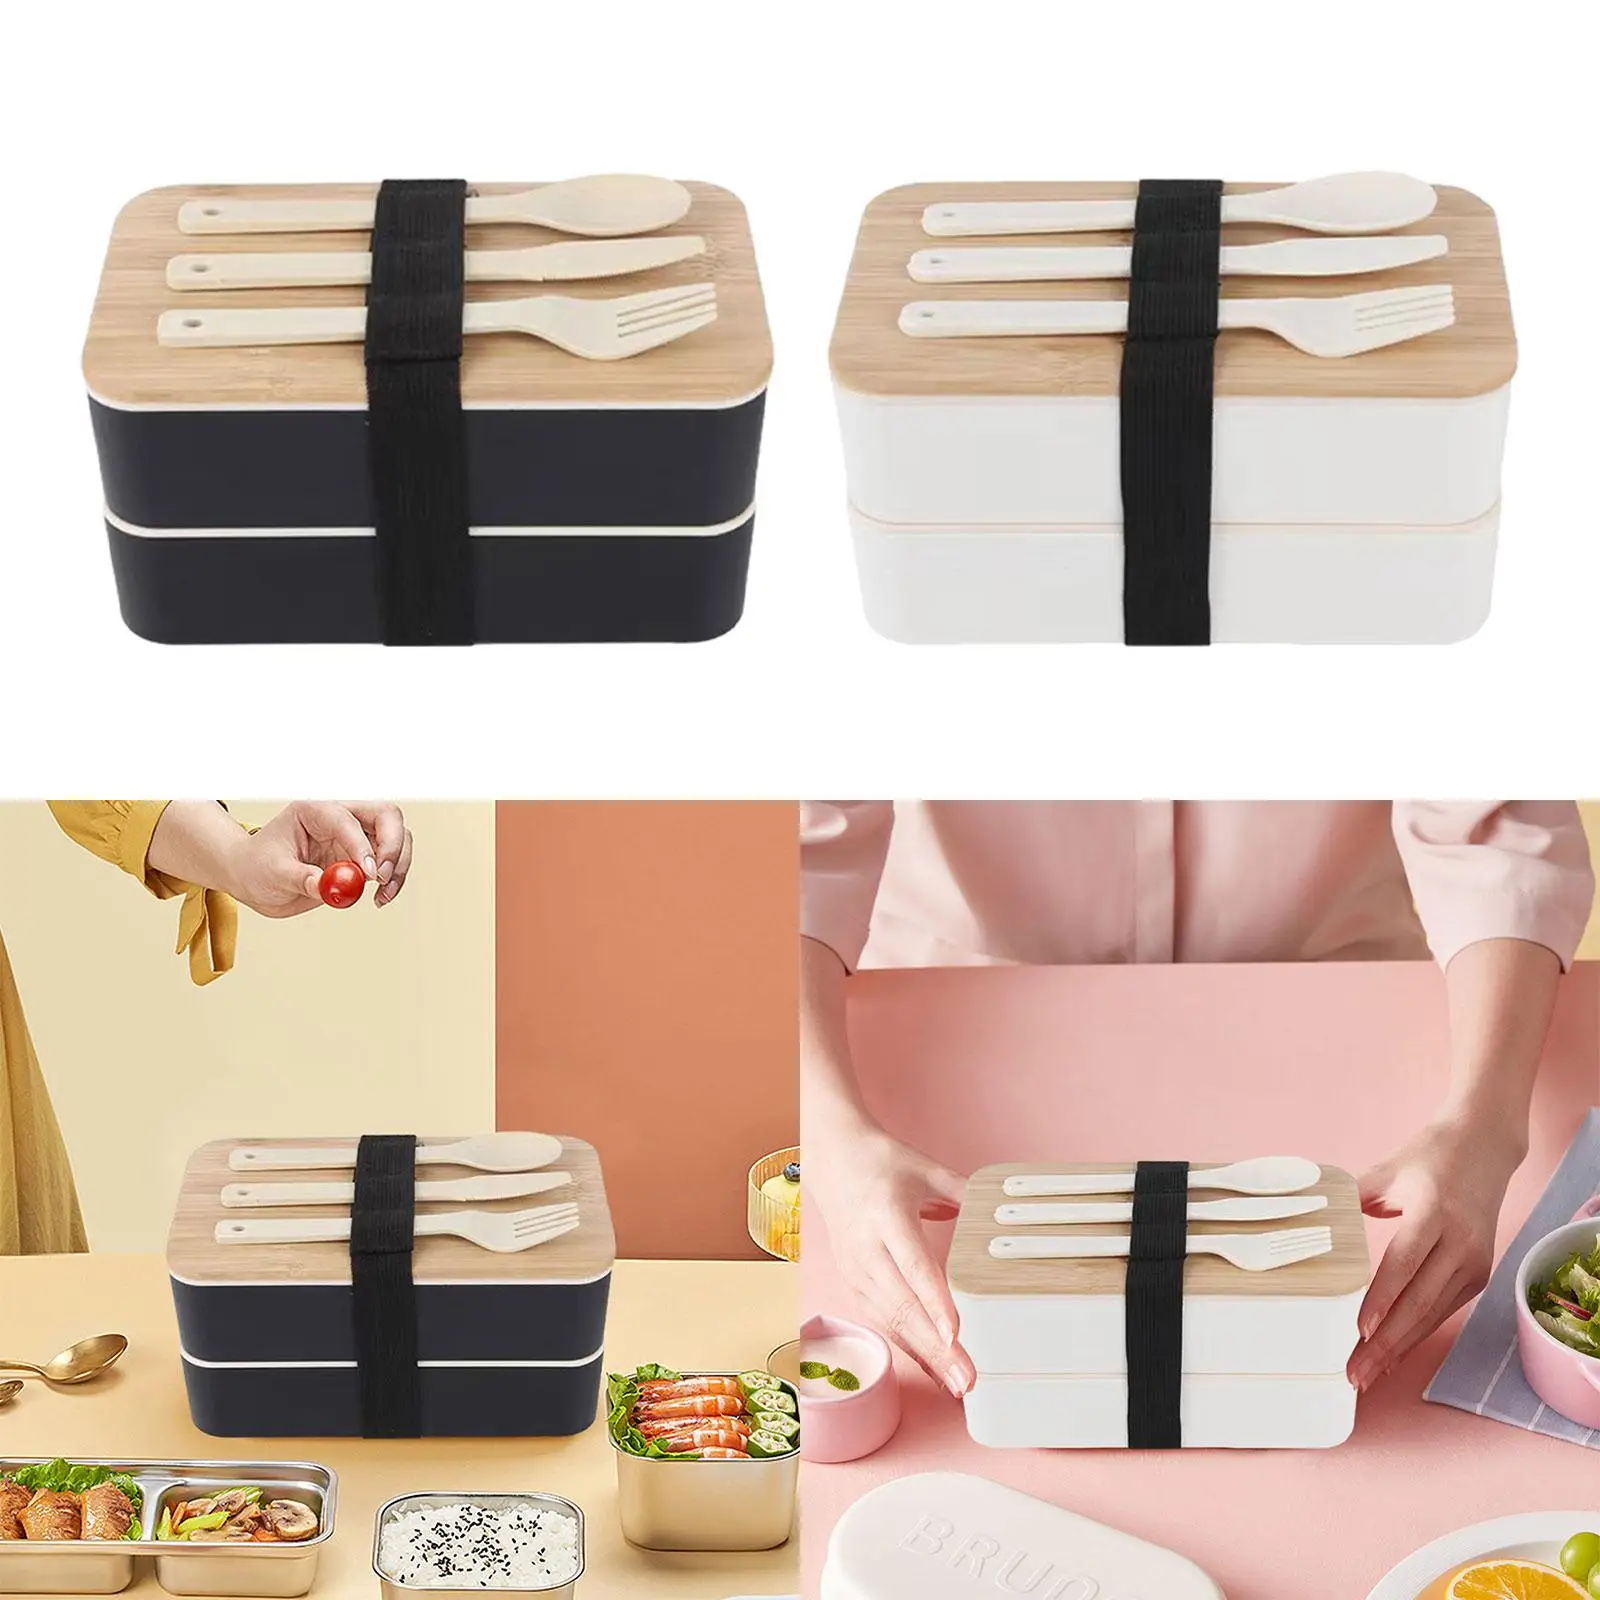 Bento Box Wood Portable Tableware Bowl Lunch Container with Divided Compartments for Travel Climbing Hiking Camping Worksite